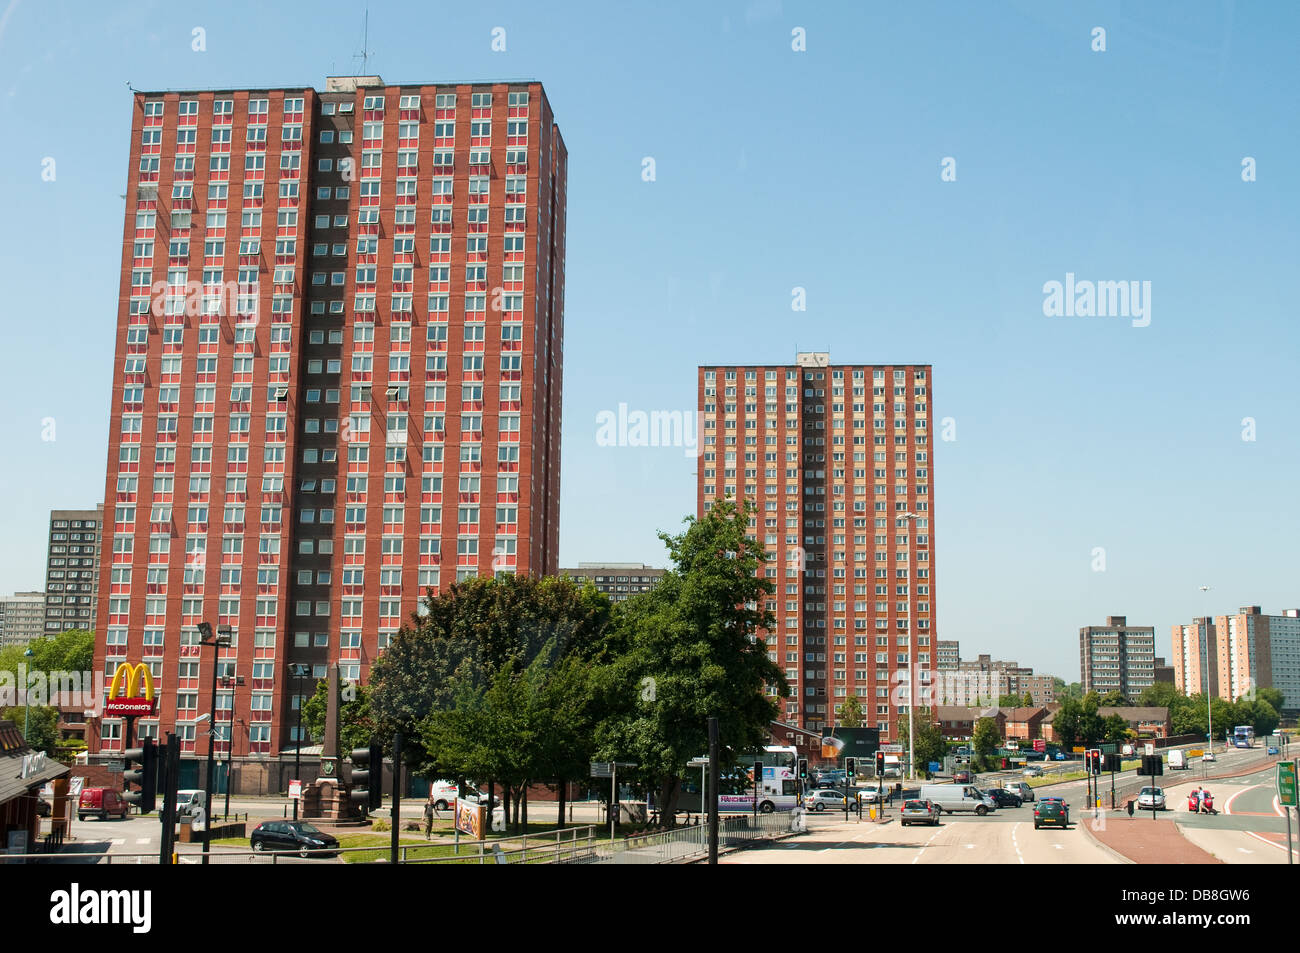 Red tower blocks on A6 motorway between Manchester and Salford, Greater Manchester, UK Stock Photo